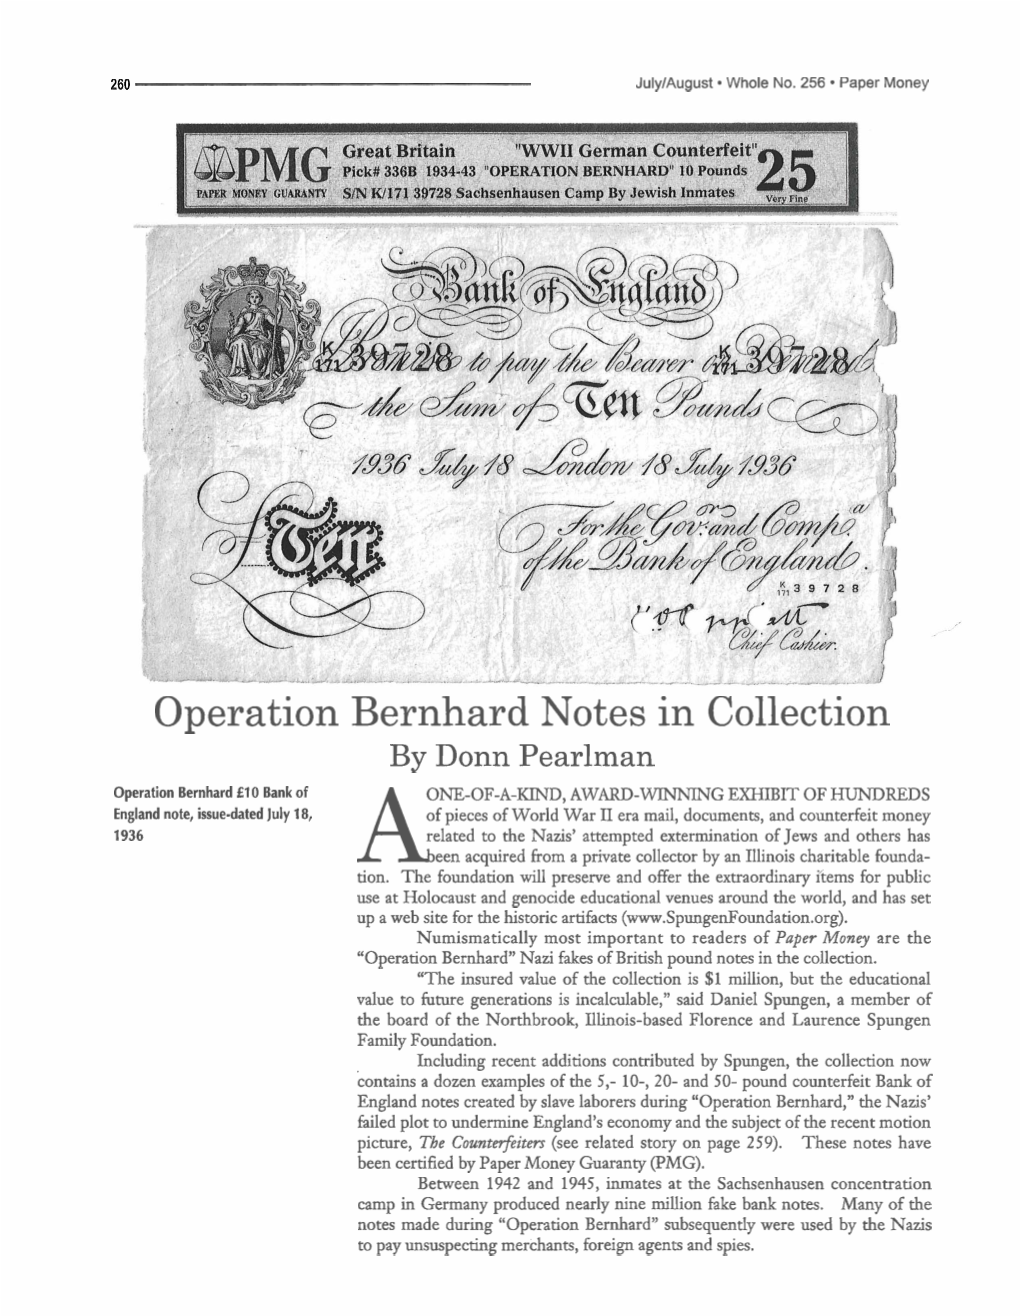 Operation Bernhard Notes in Collection